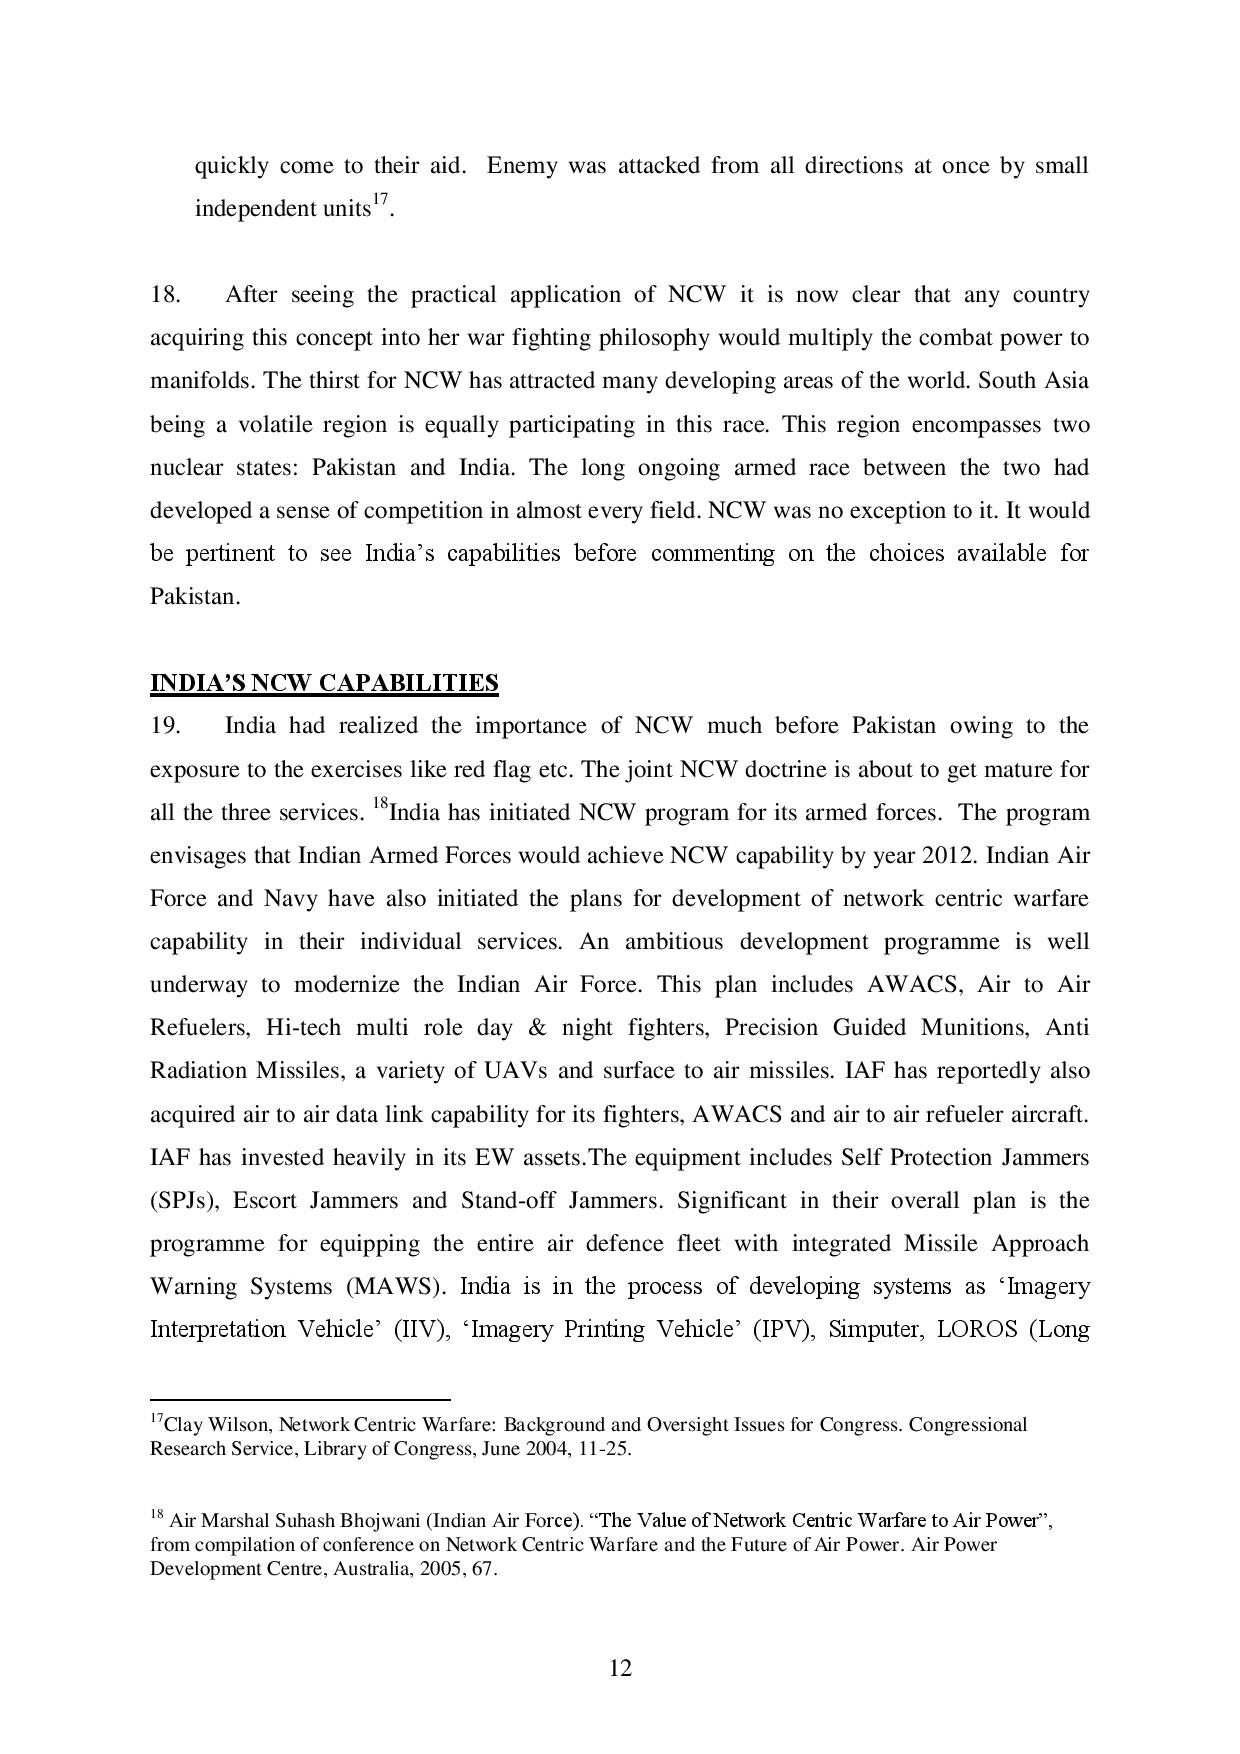 LINK_NETWORK CENTRIC WARFARE A NEW DIMENSION FOR PAKISTAN DEFENCE FORCES-page-012.jpg